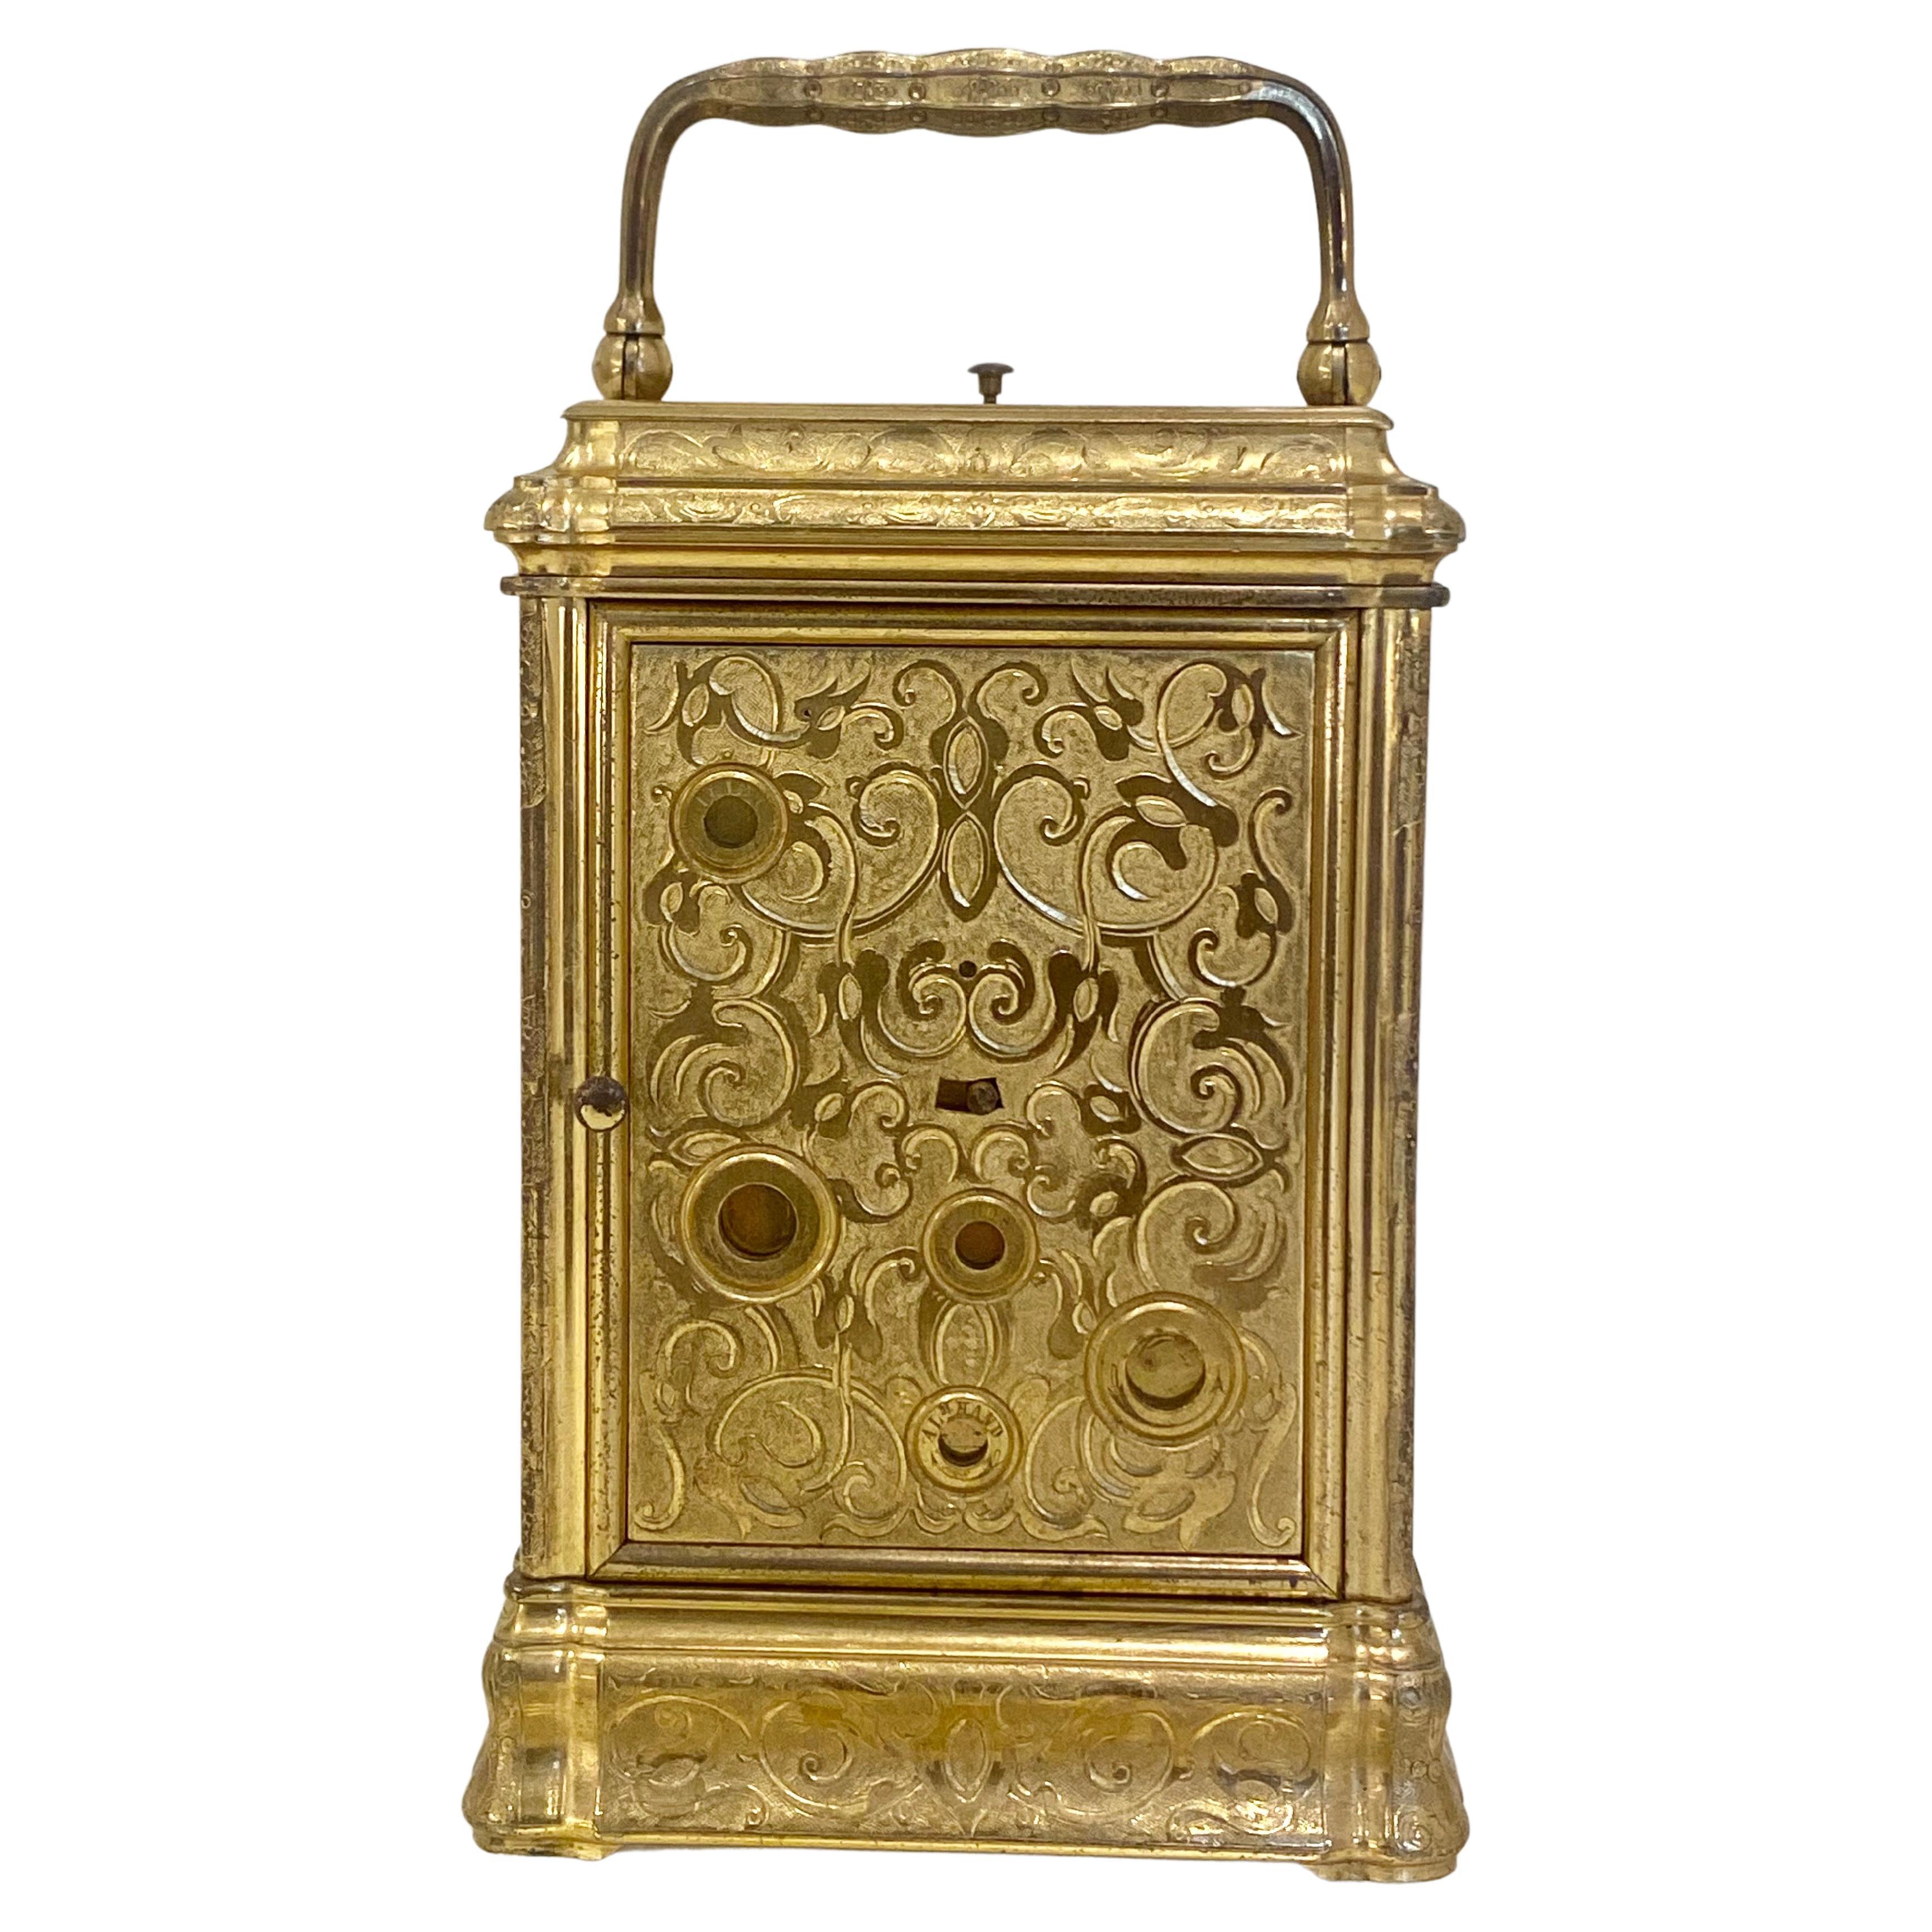 Swiss Profusely Engraved to All Sides Gilt Bronze Carriage Clock, circa 1860 For Sale